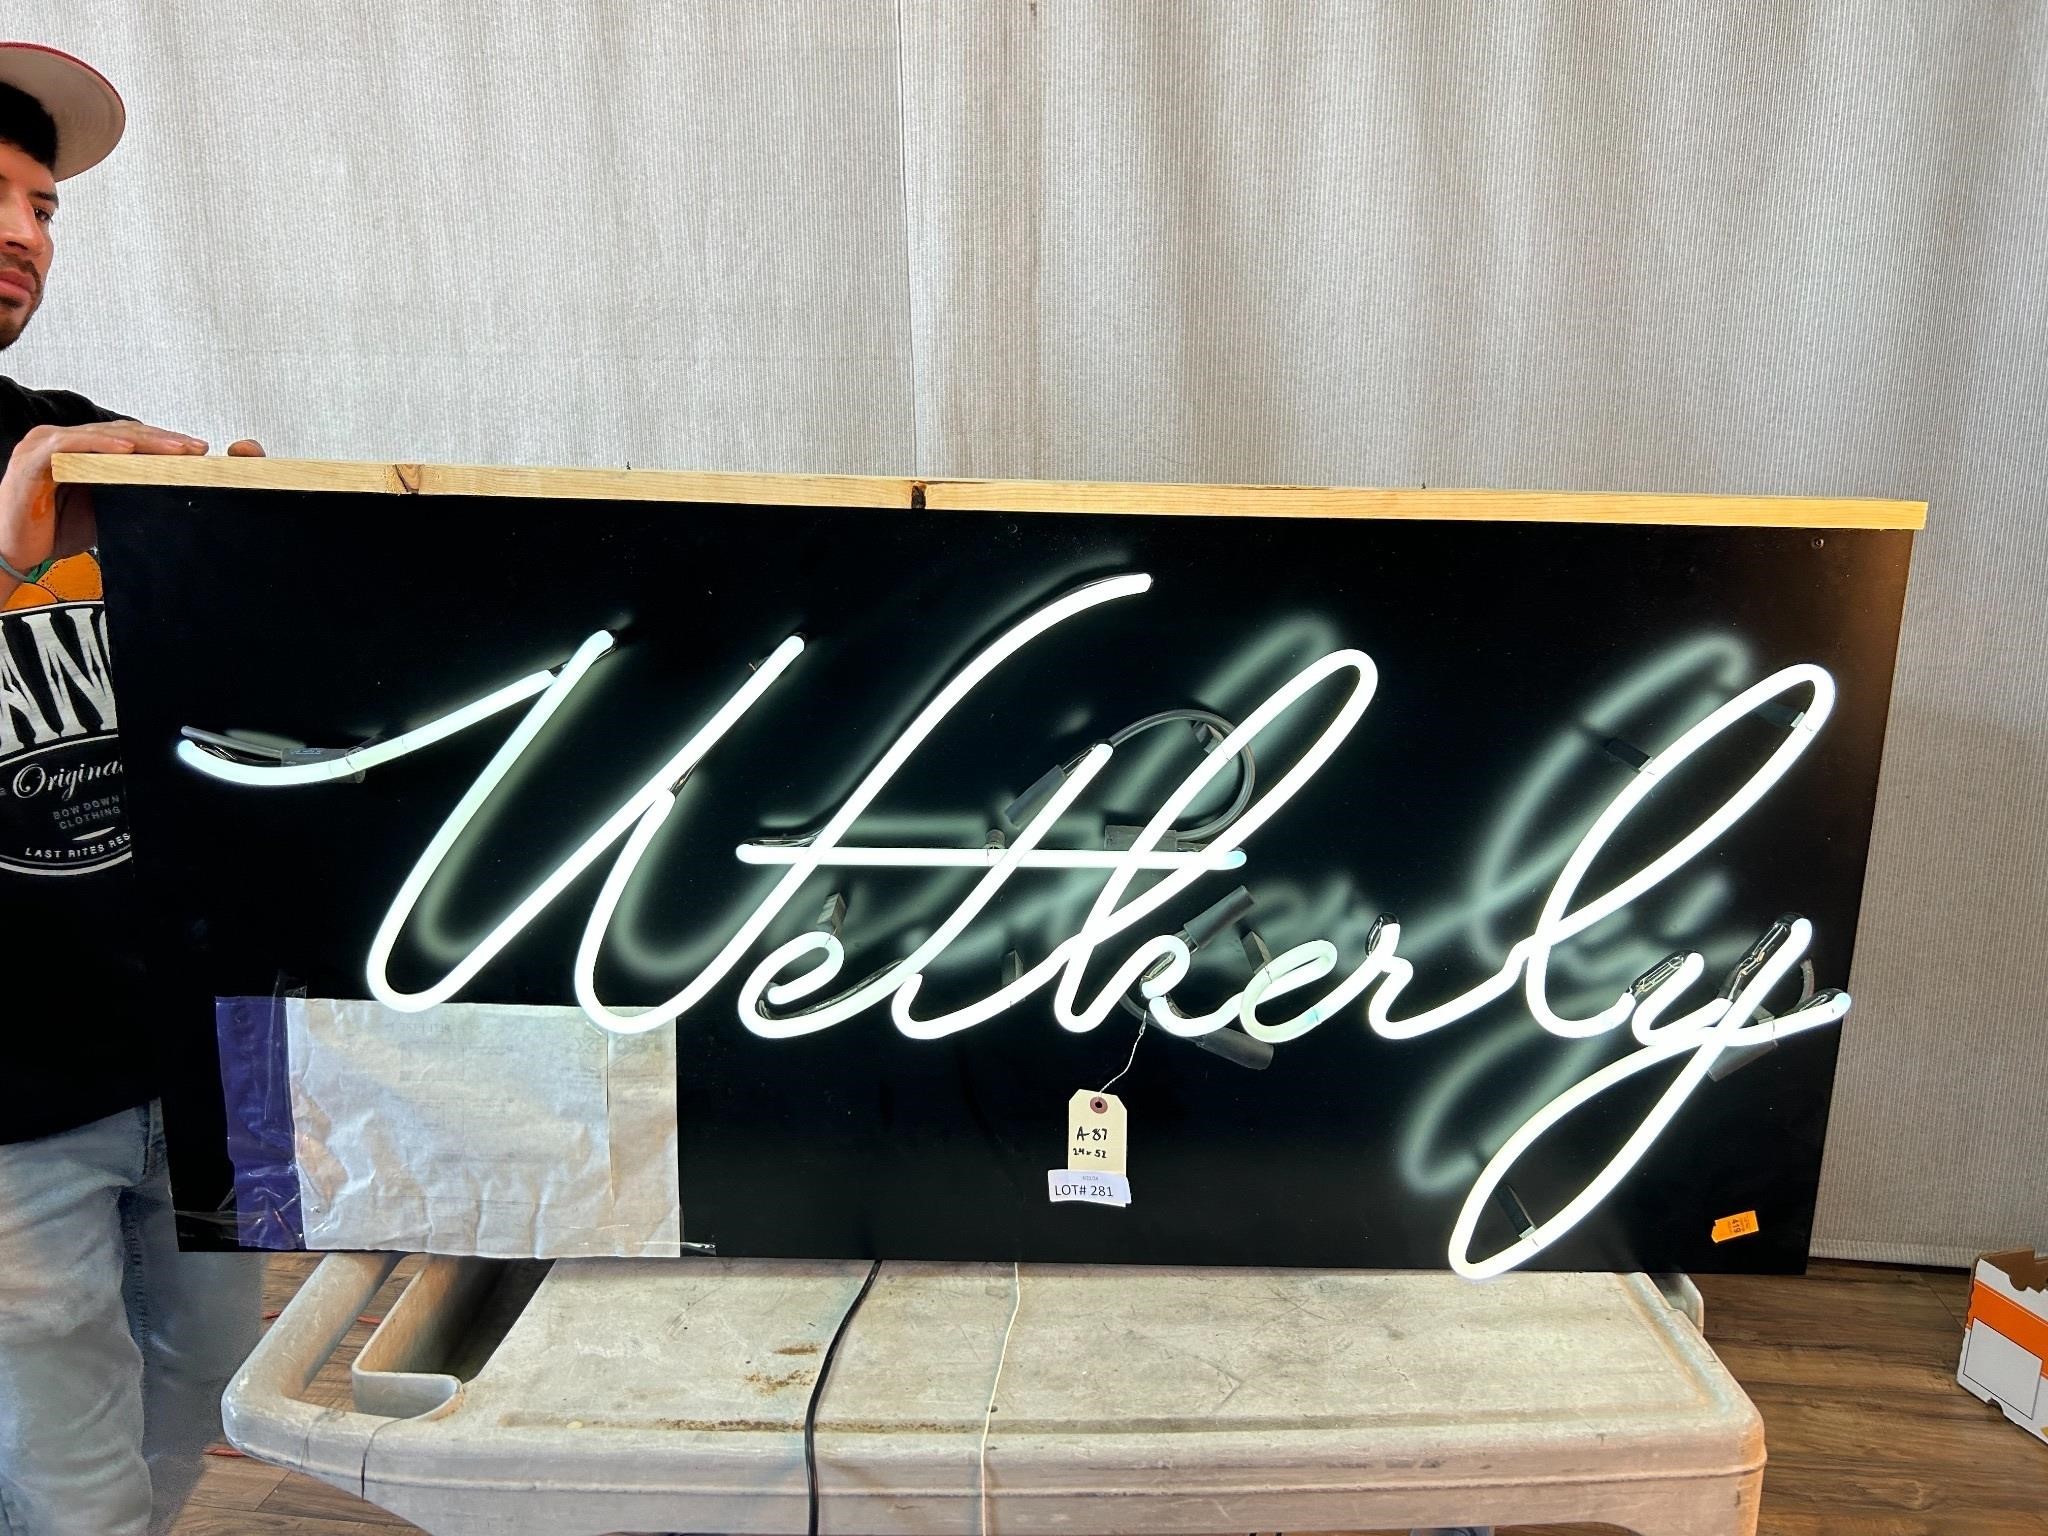 Lighted Neon Sign "Wetherly"